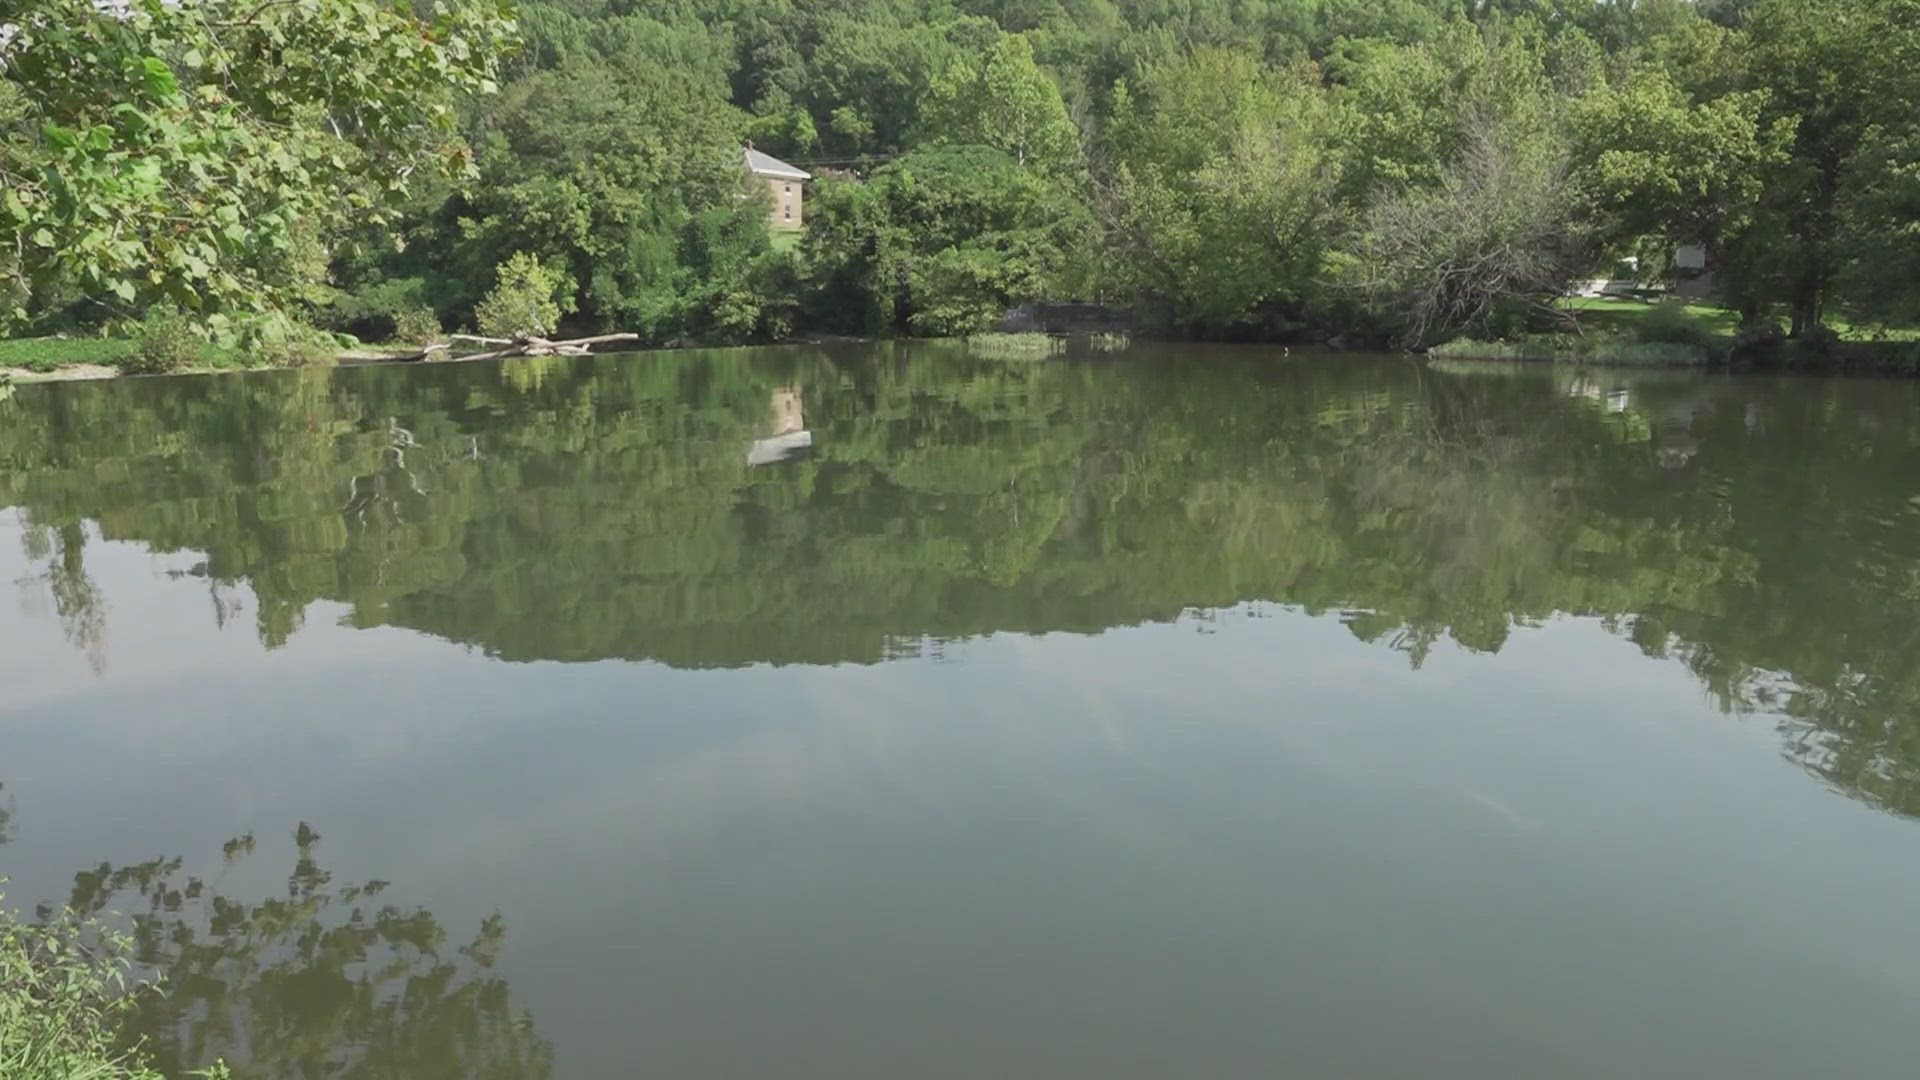 The U.S. Corps of Engineers said it plans to remove chunks of two dams in Blount County — the Rockford Dam and Peery's Mill Dam.